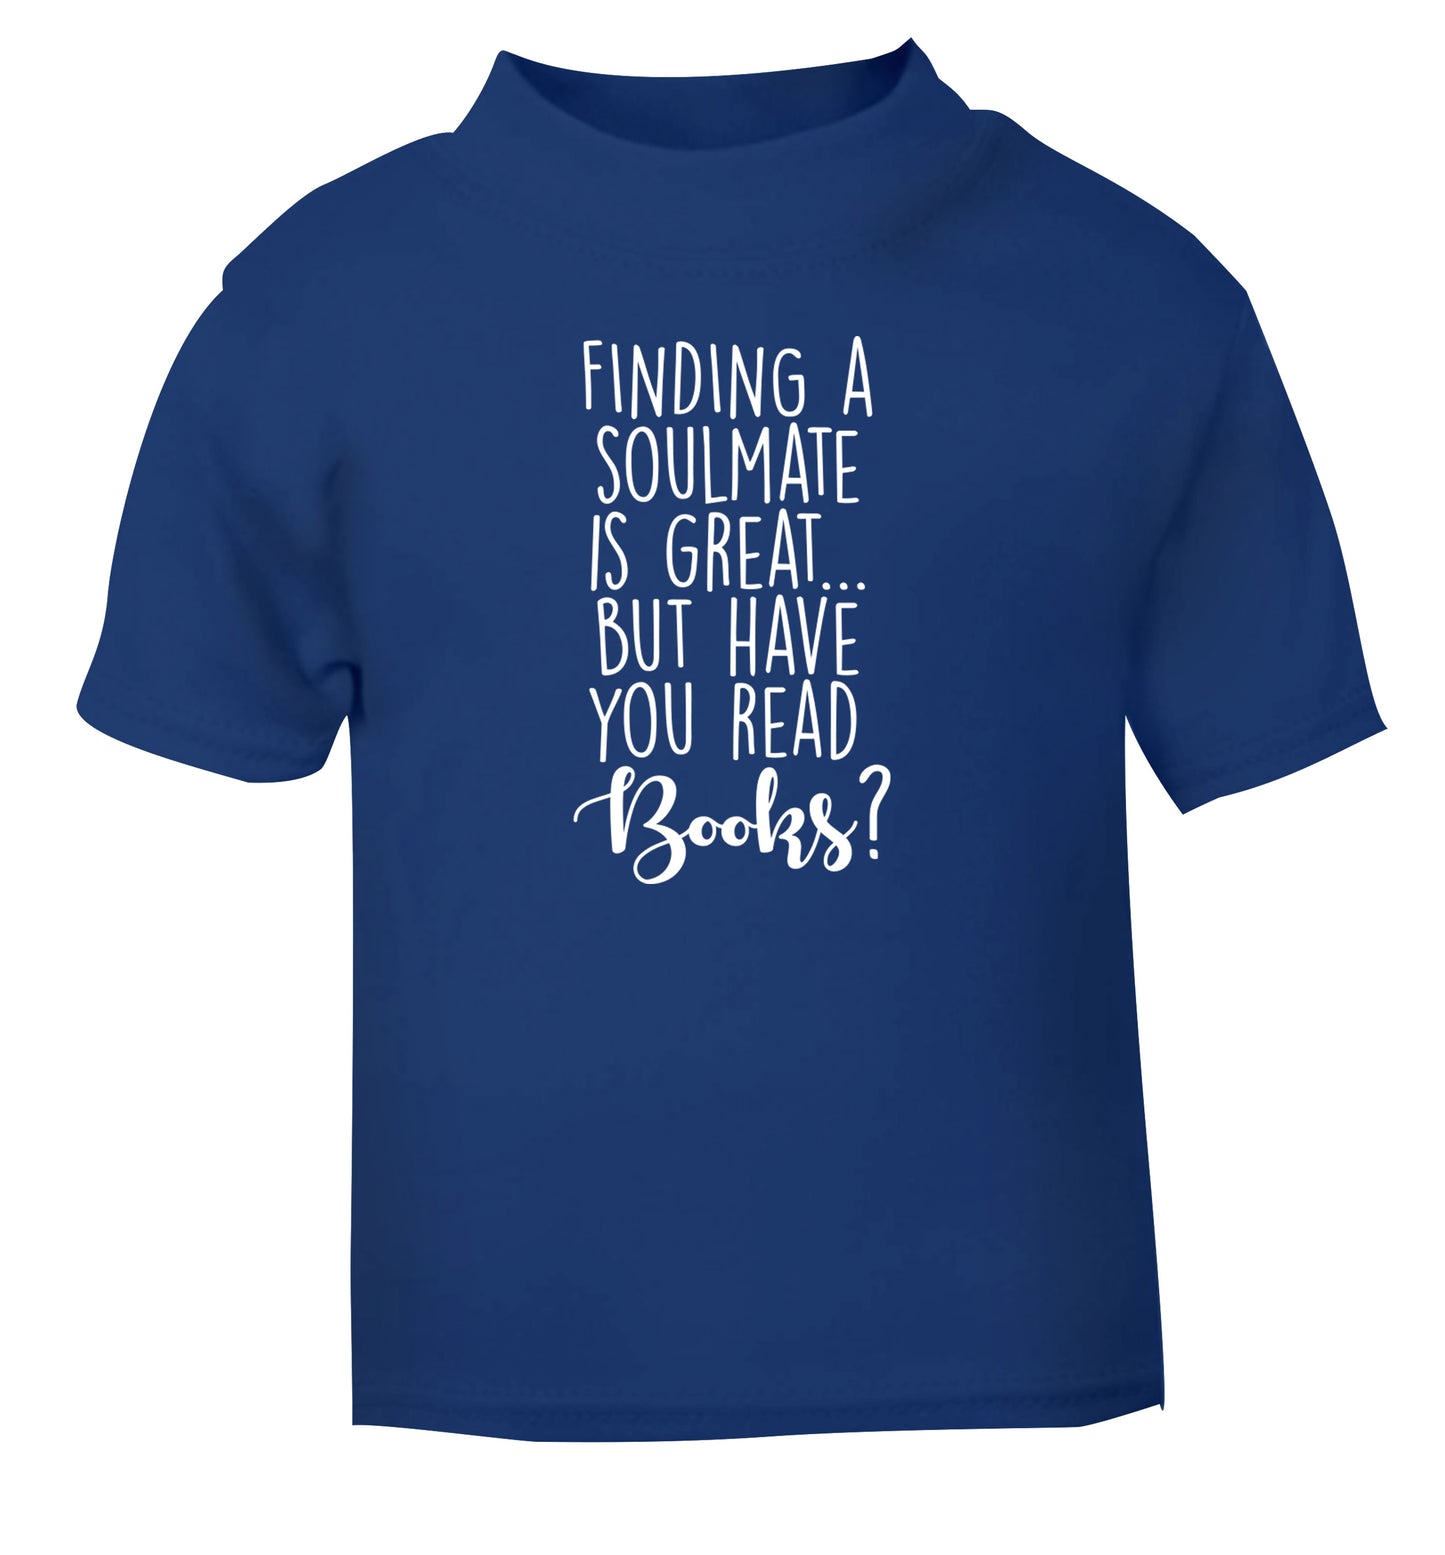 Finding a soulmate is great but have you read books? blue Baby Toddler Tshirt 2 Years